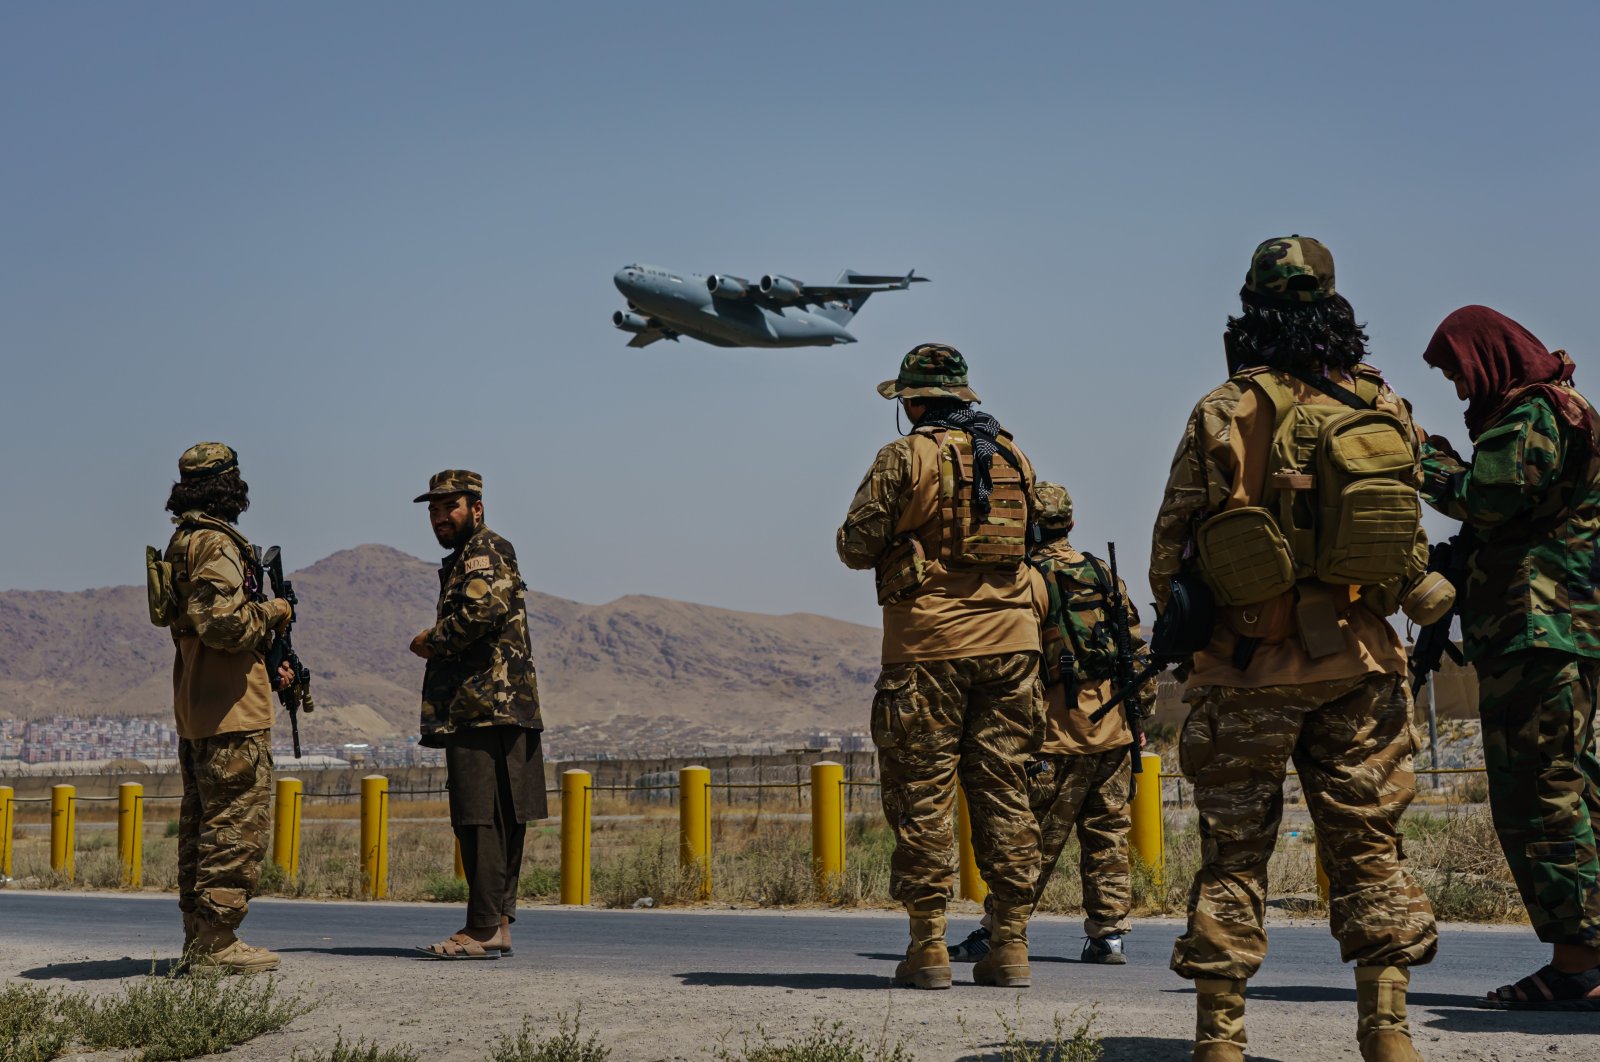 A C-17 Globemaster takes off as Taliban fighters secure the outer perimeter, alongside the U.S.-controlled side of Kabul Hamid Karzai International Airport, Kabul, Afghanistan, Aug. 29, 2021. (Photo by Getty Images)